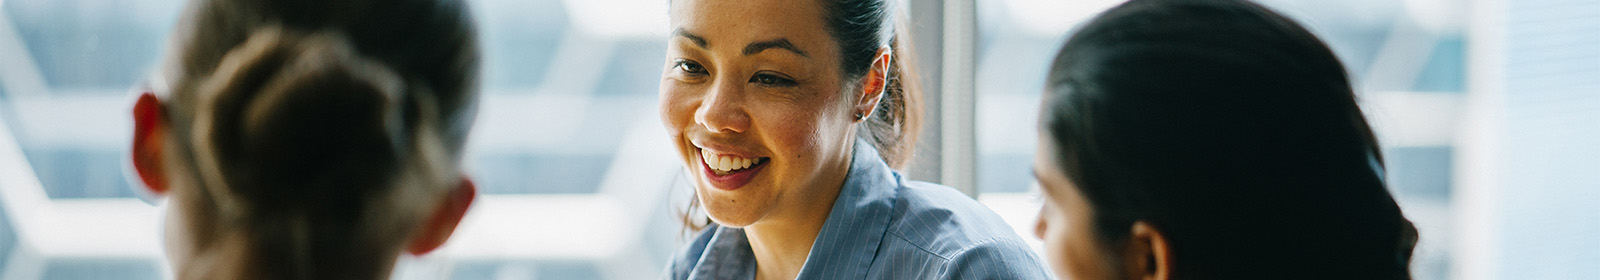 Female smiling in a group of people